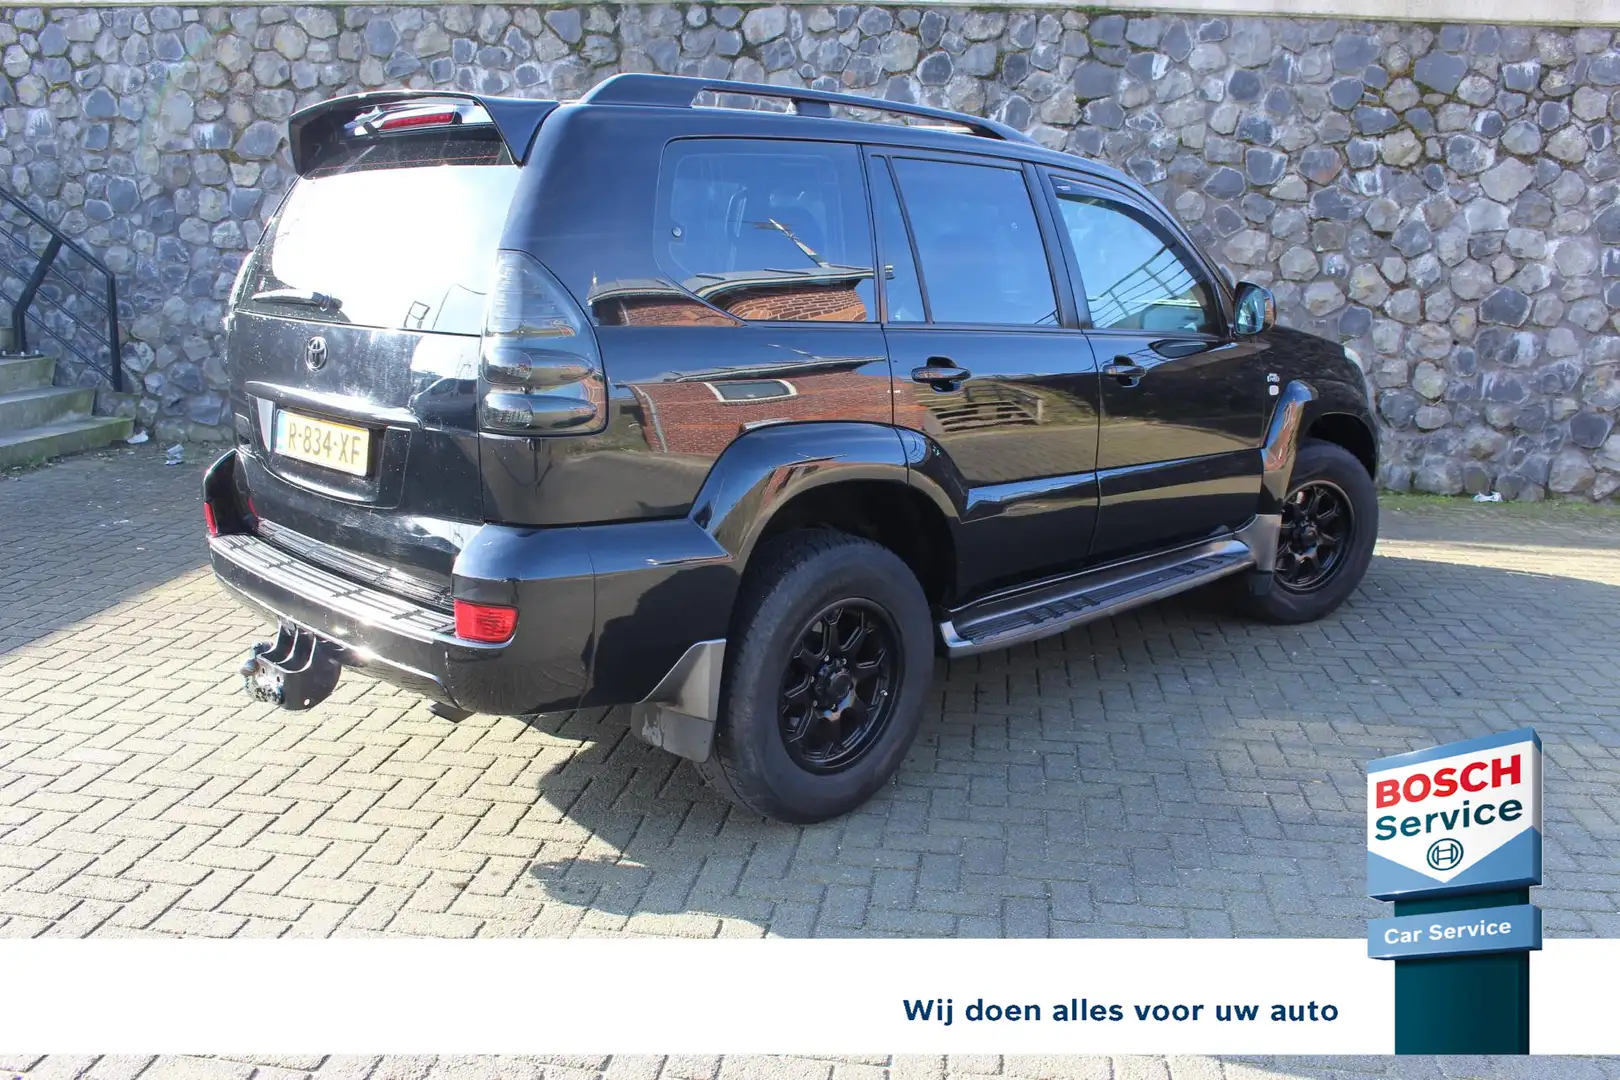 Toyota Land Cruiser 3.0 D-4D VX 5 pers Automaat Alle optie´s revisie v Czarny - 2